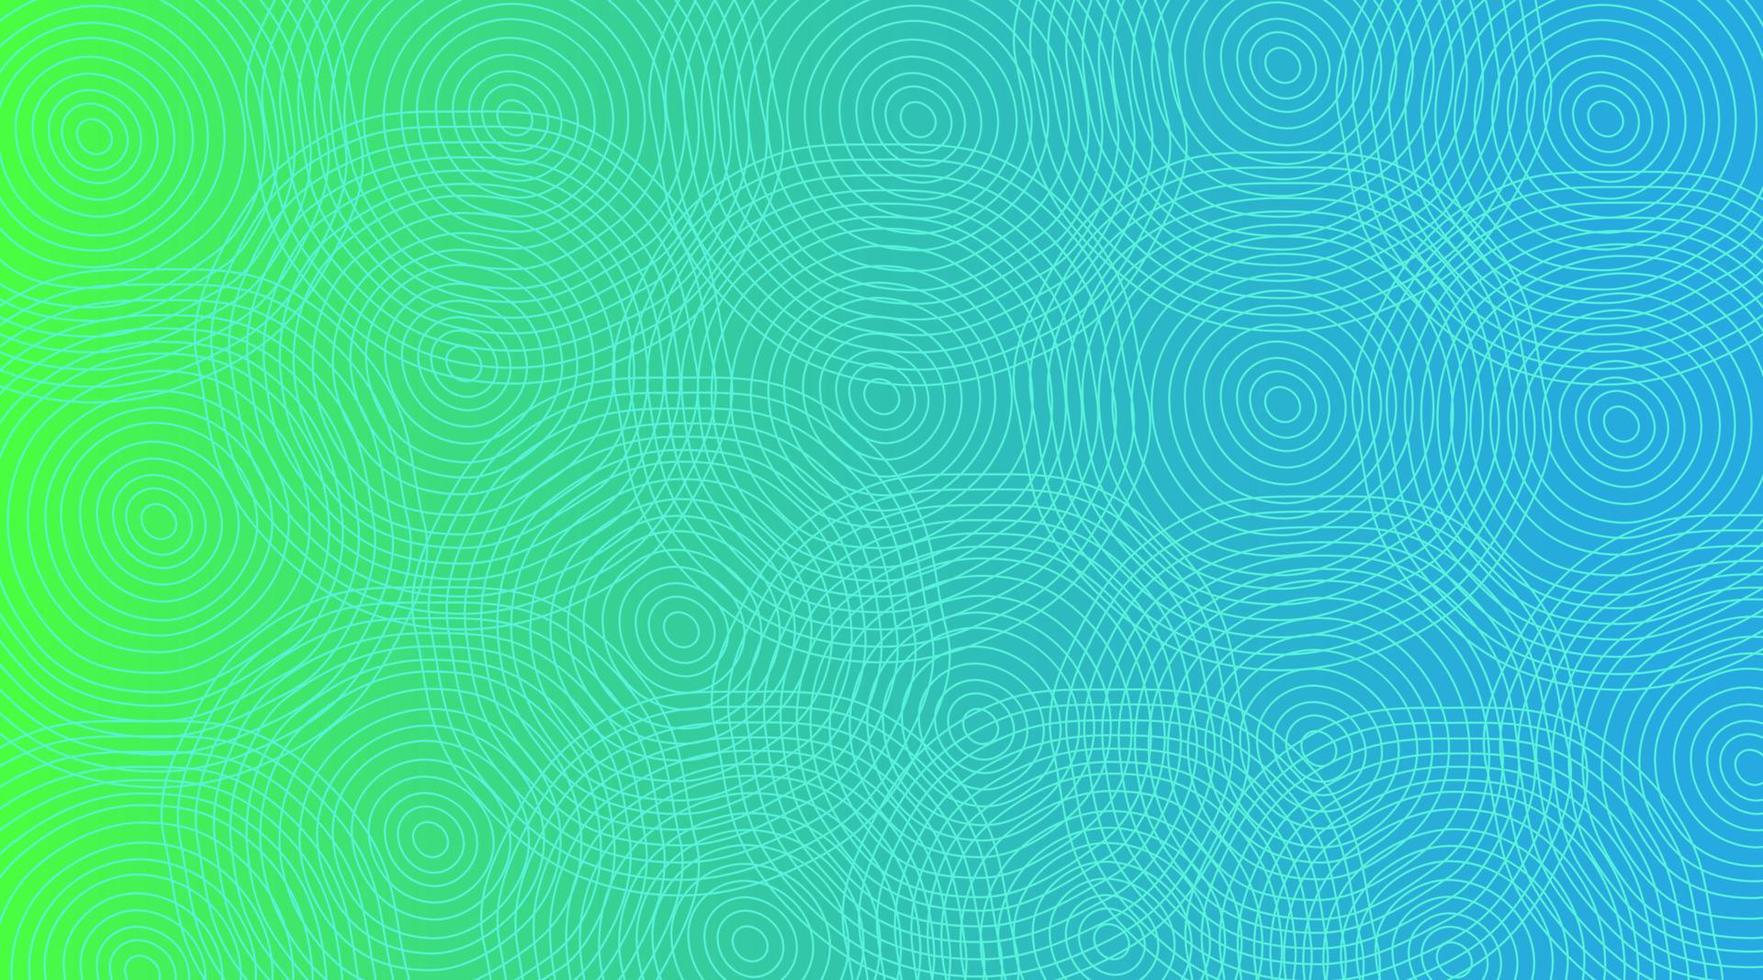 Circles abstract geometric on blue and green background. Vector design